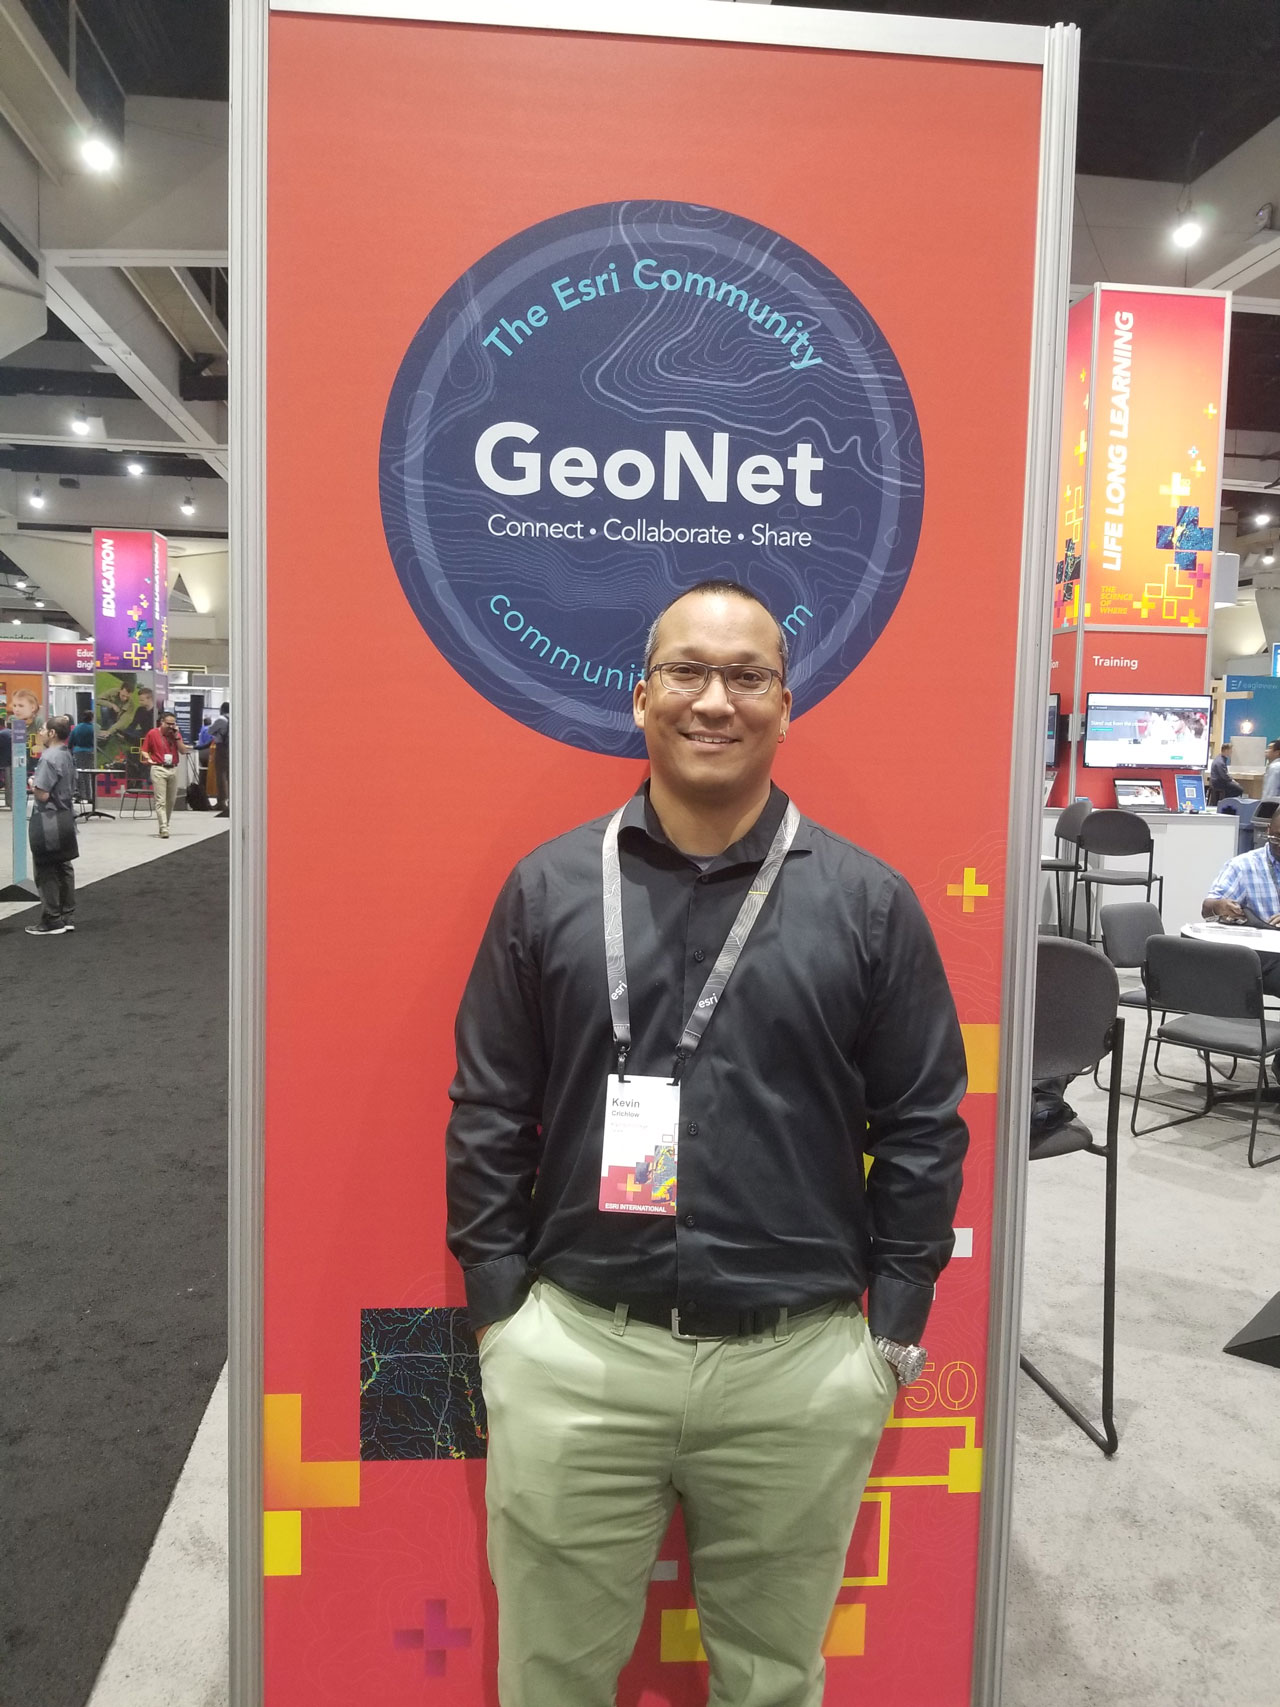 Kevin poses with the GeoNet logo.